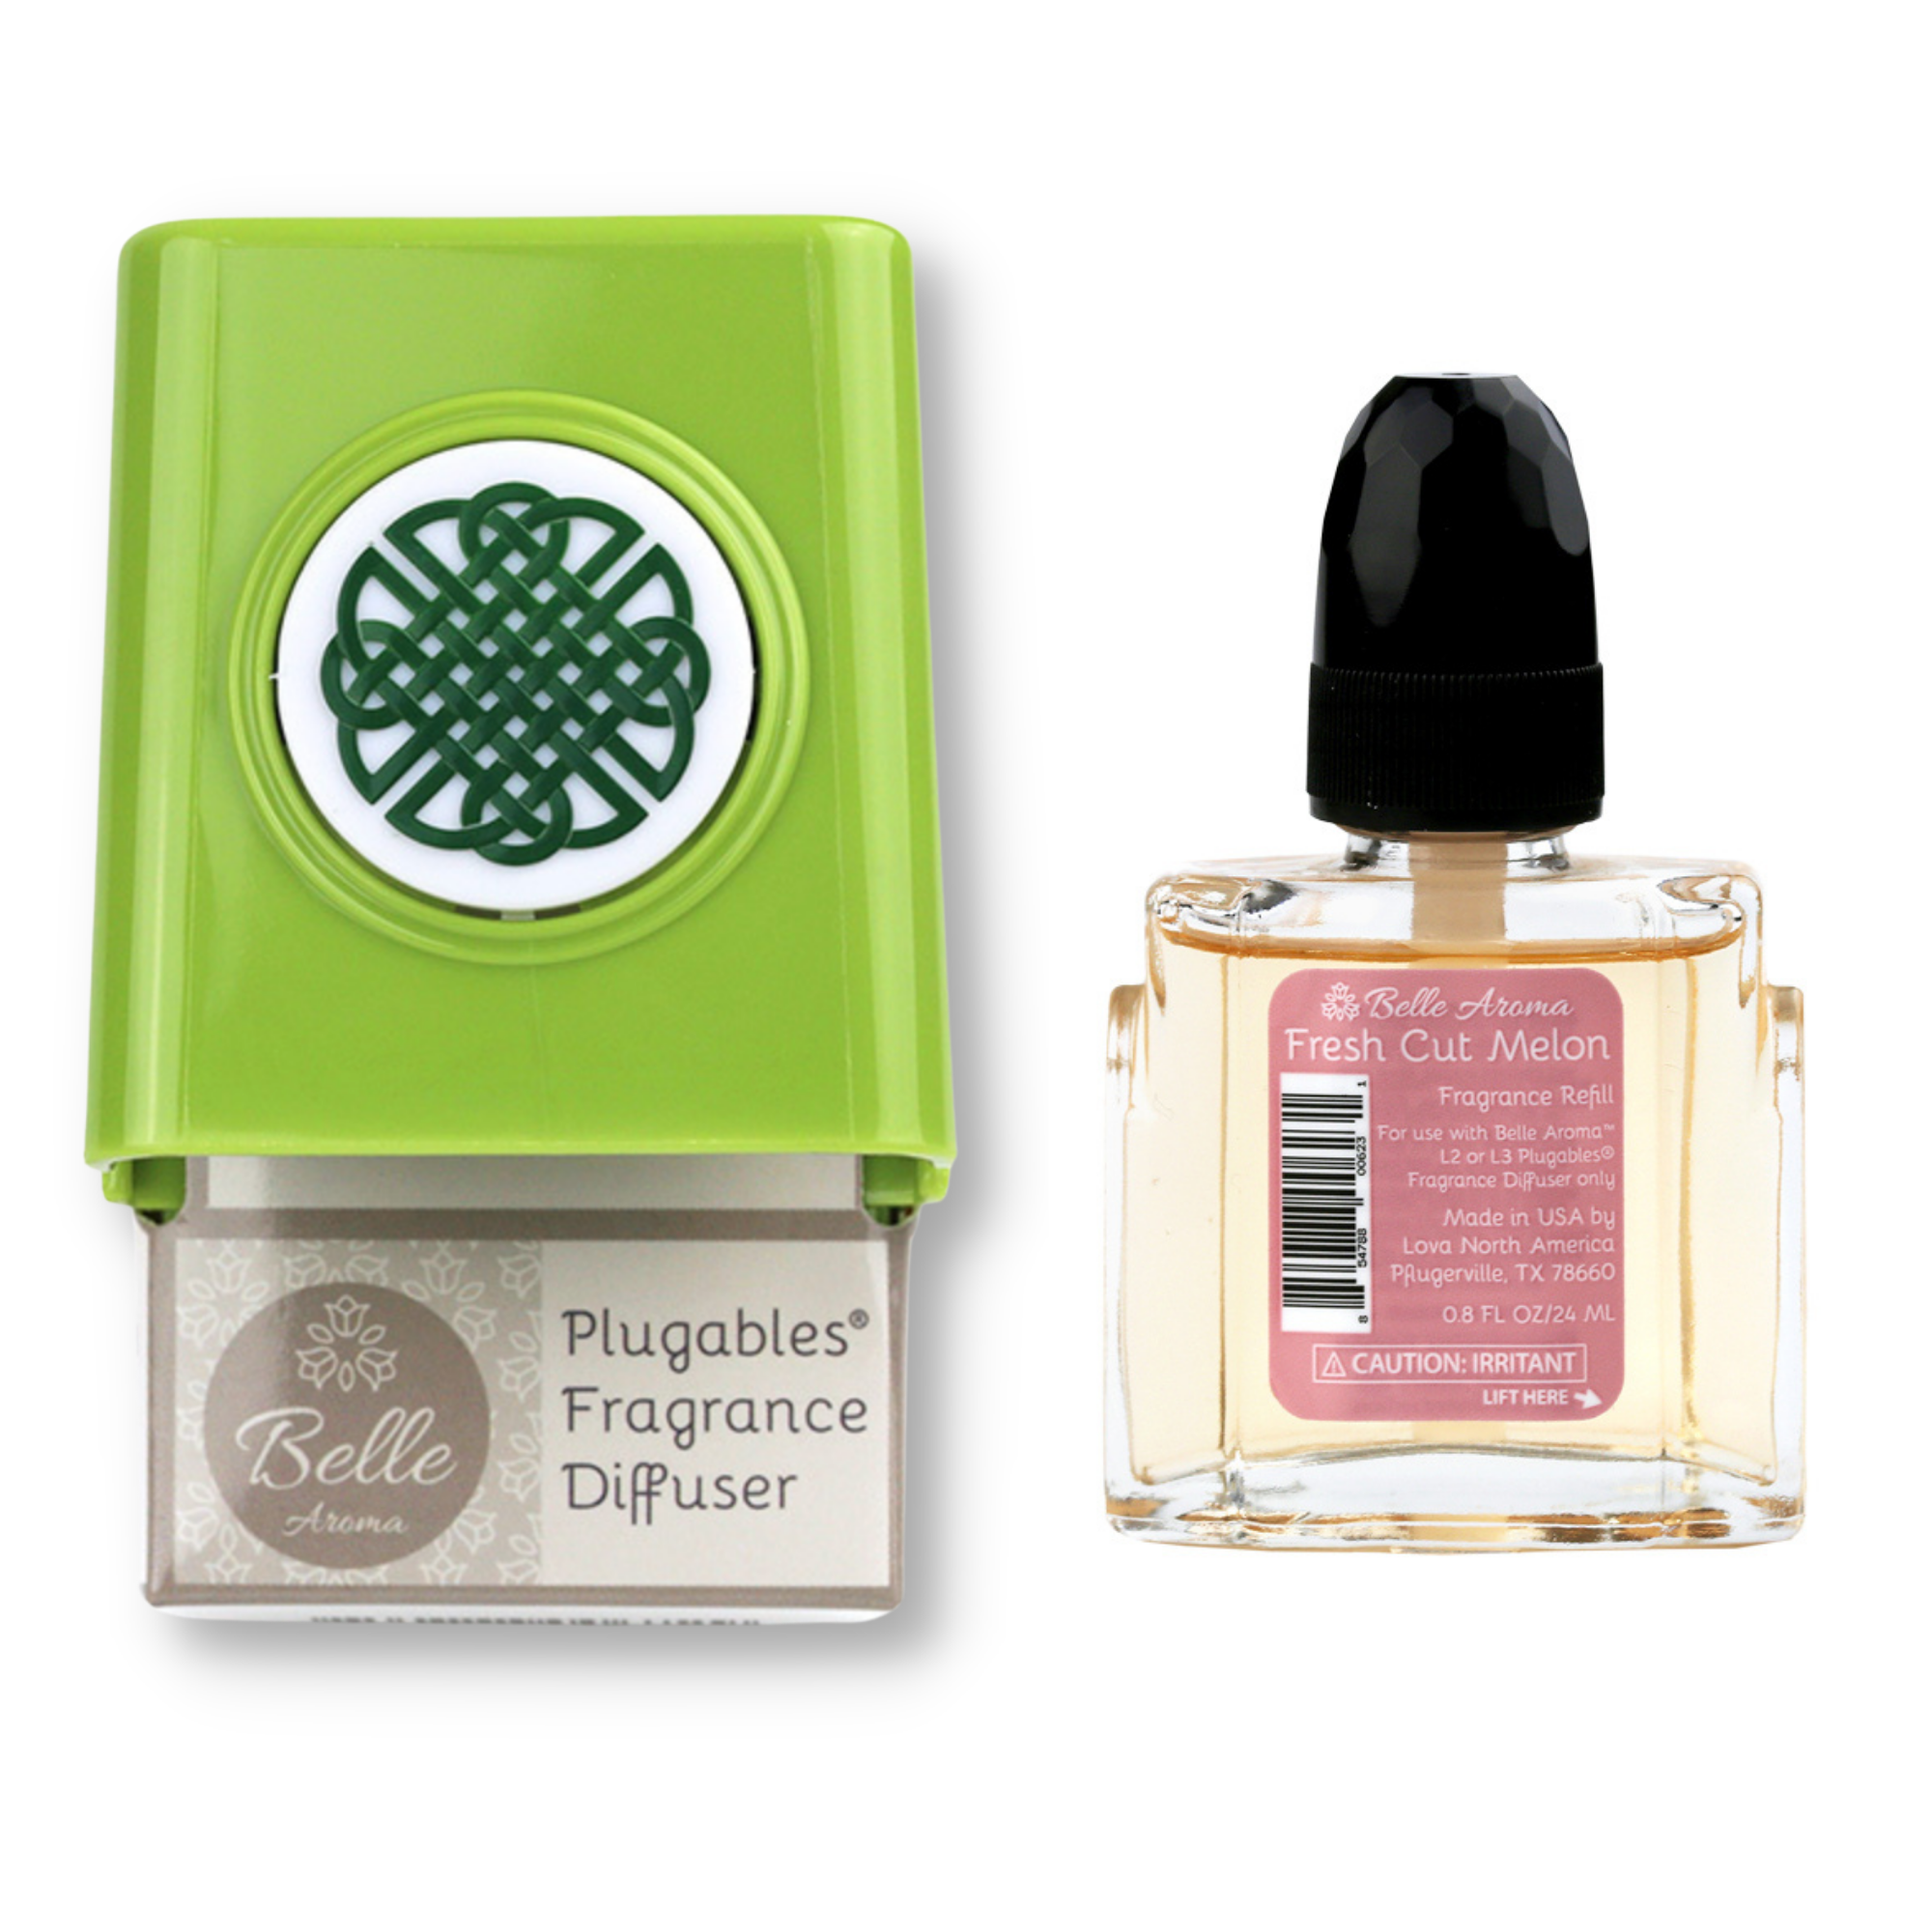 Celtic Knot Medallion Plugables® Plugin Electric Scented Oil Diffuser - Granny Smith with Fresh Cut Melon Fragrance Oil Home Fragrance Accessories